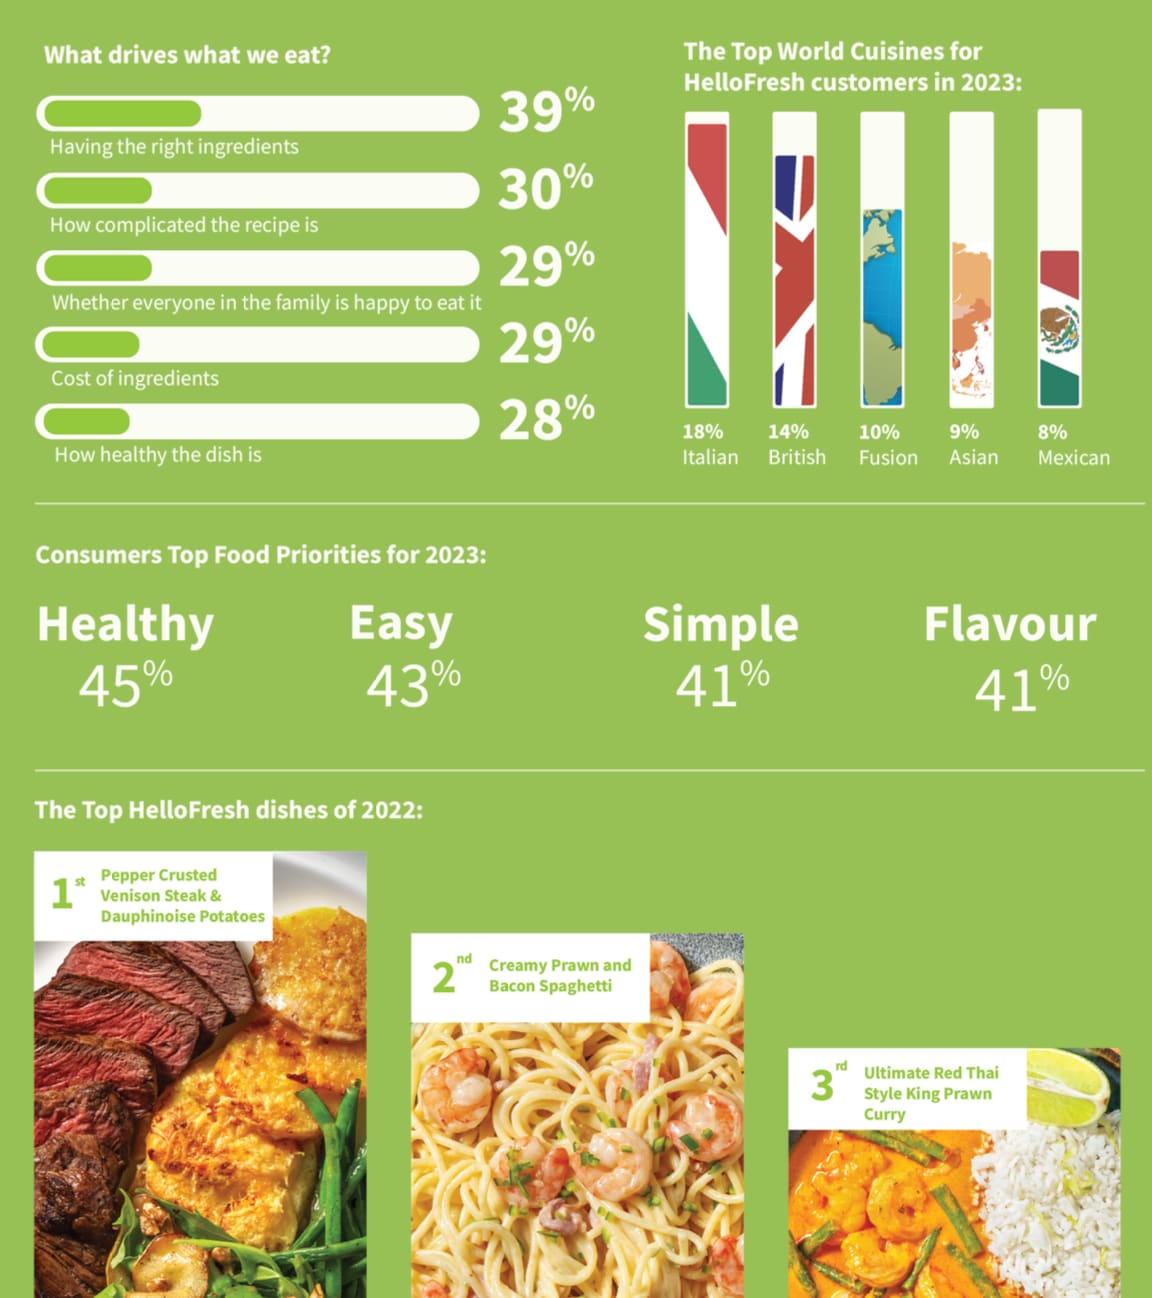 <h2>Eating Habits and Food Trends for 2023 and Beyond</h2>